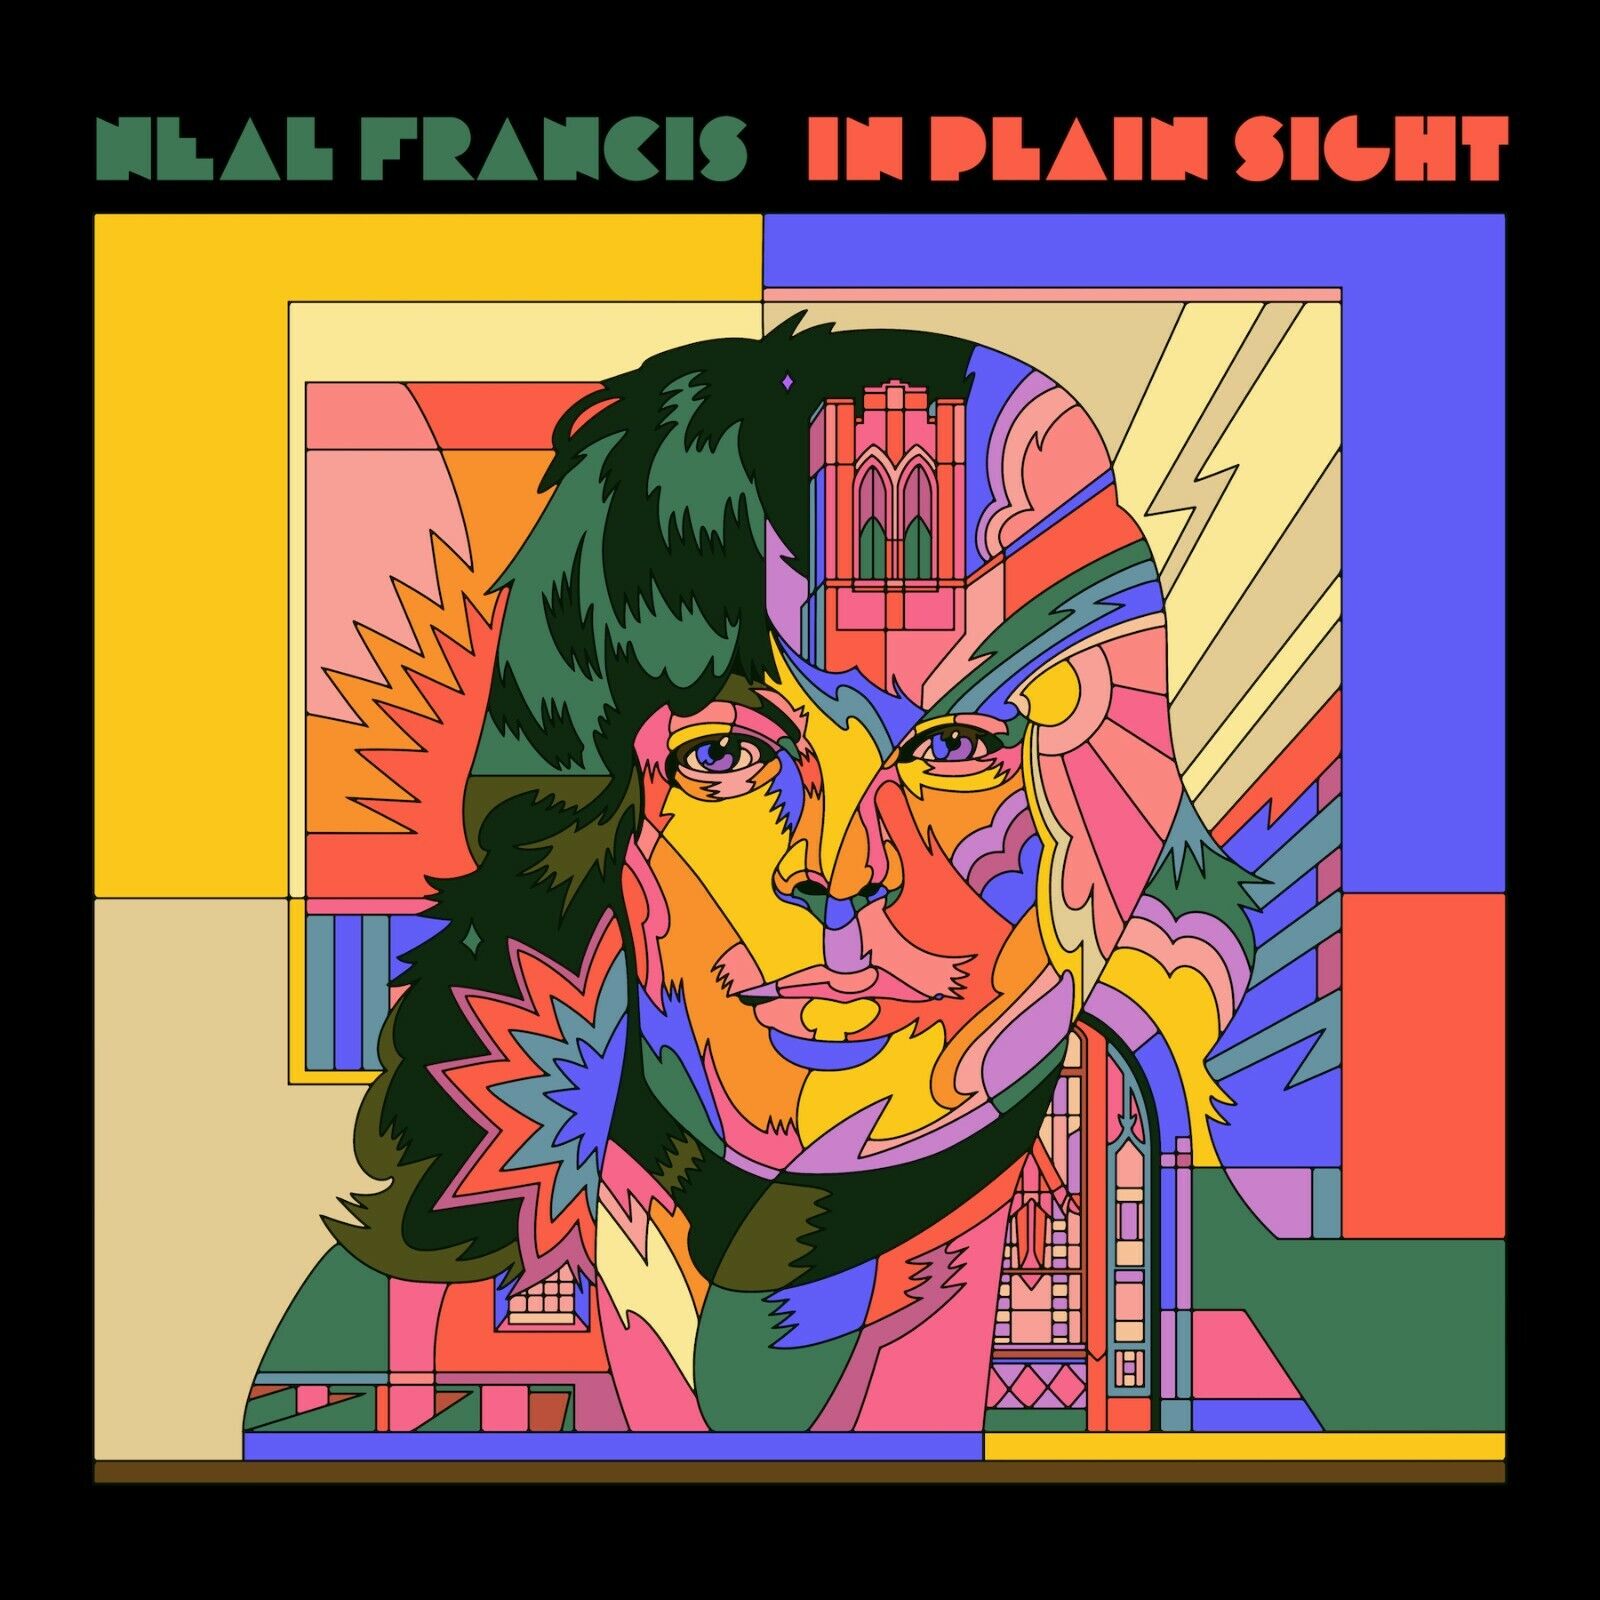 Neal Francis - In Plain Sight (Indie Exclusive, Teal Vinyl) (LP) - Joco Records